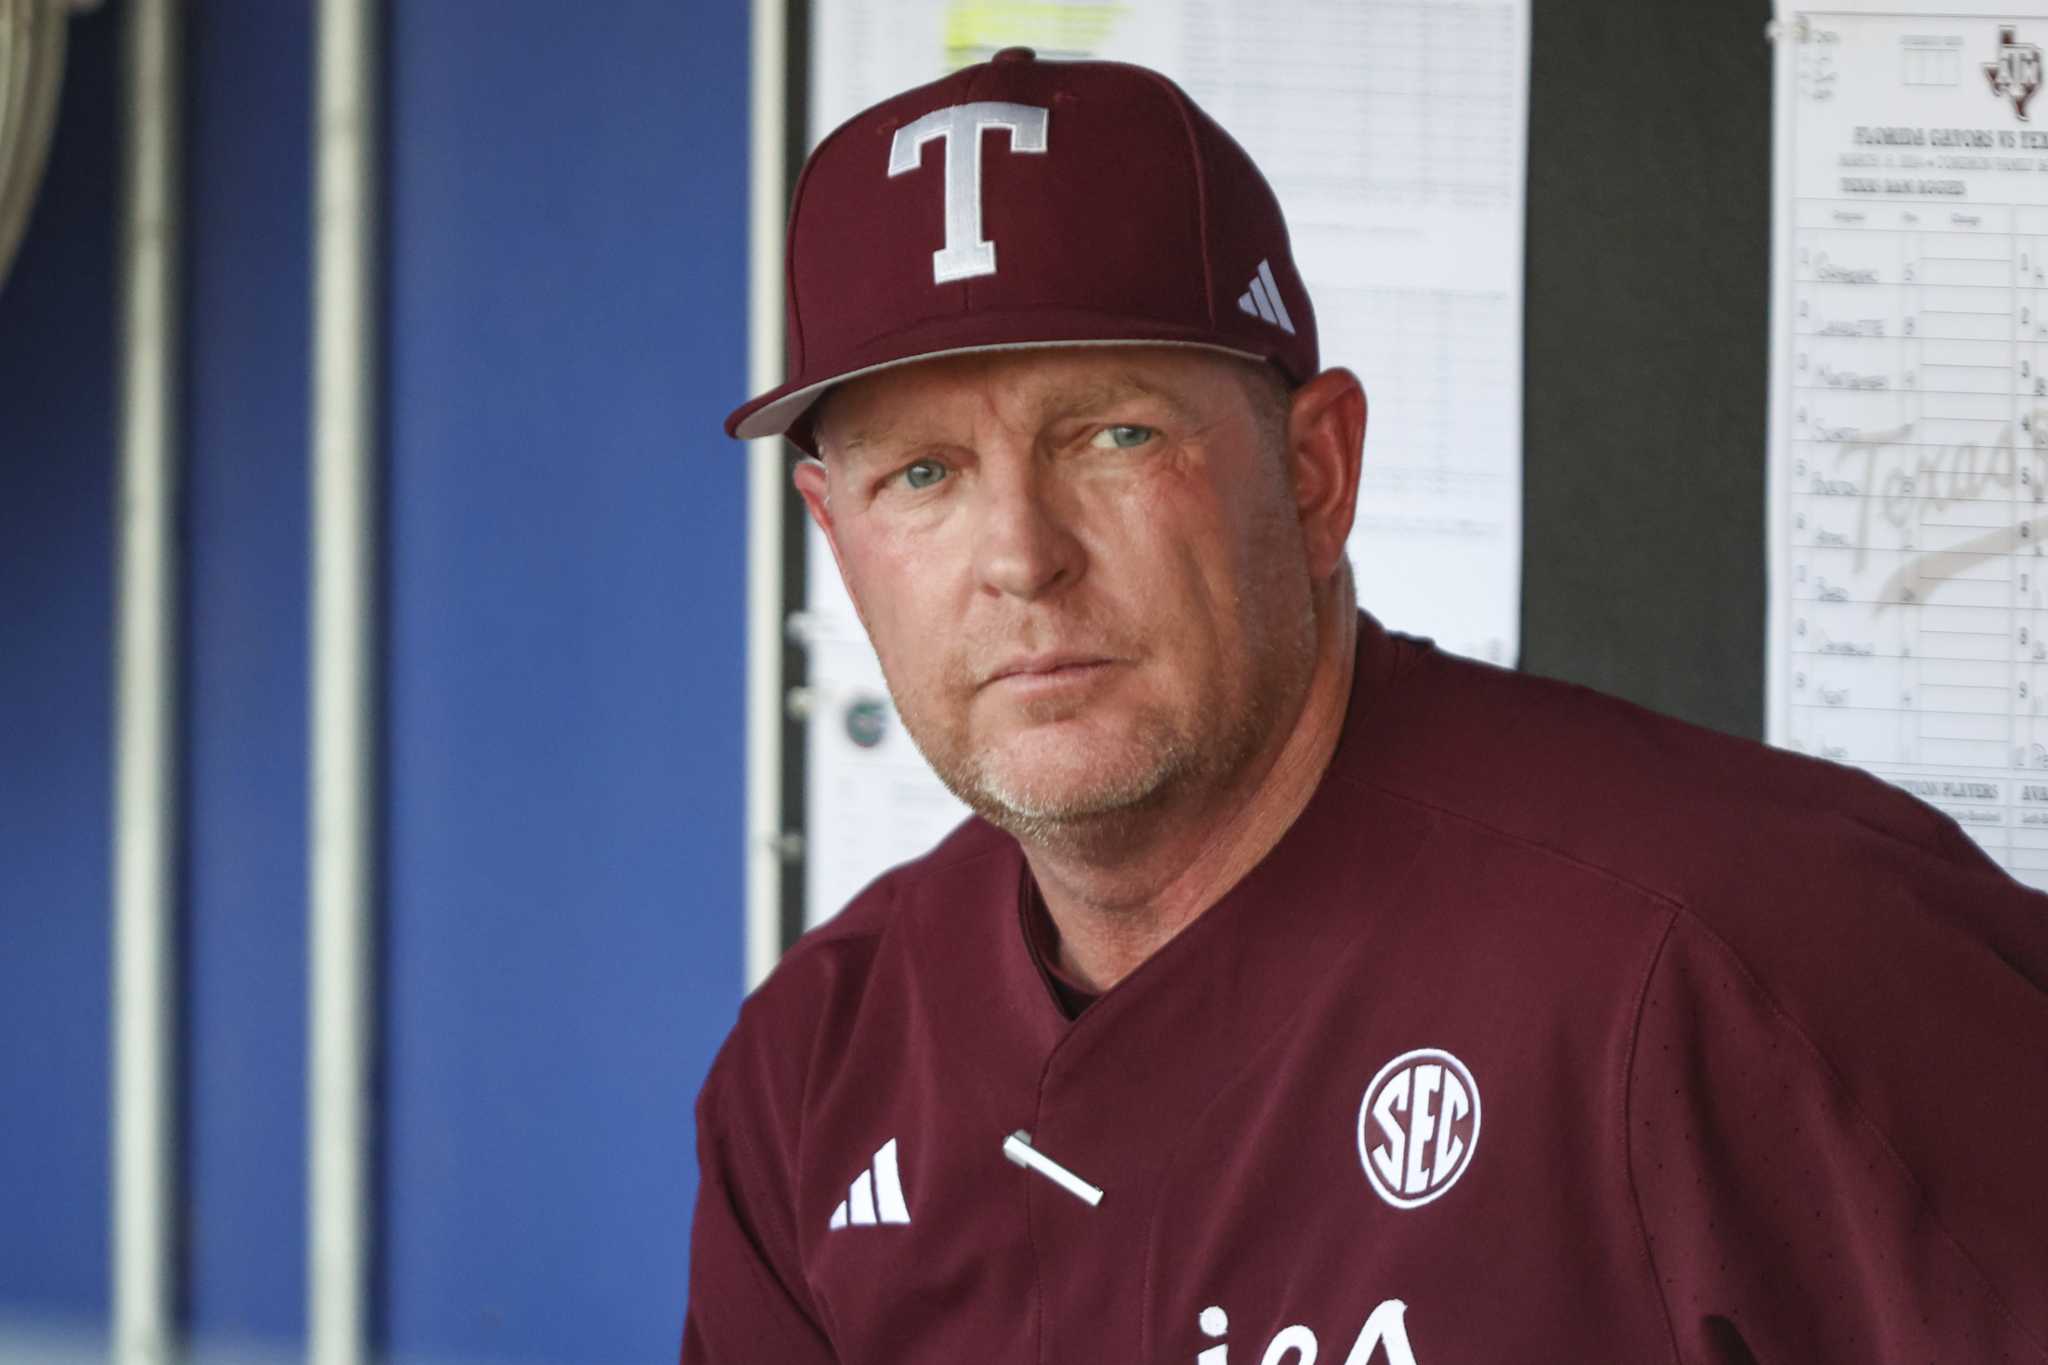 Videos of Georgia pitcher before and during his dominant outing leads A&M coach to suspect cheating